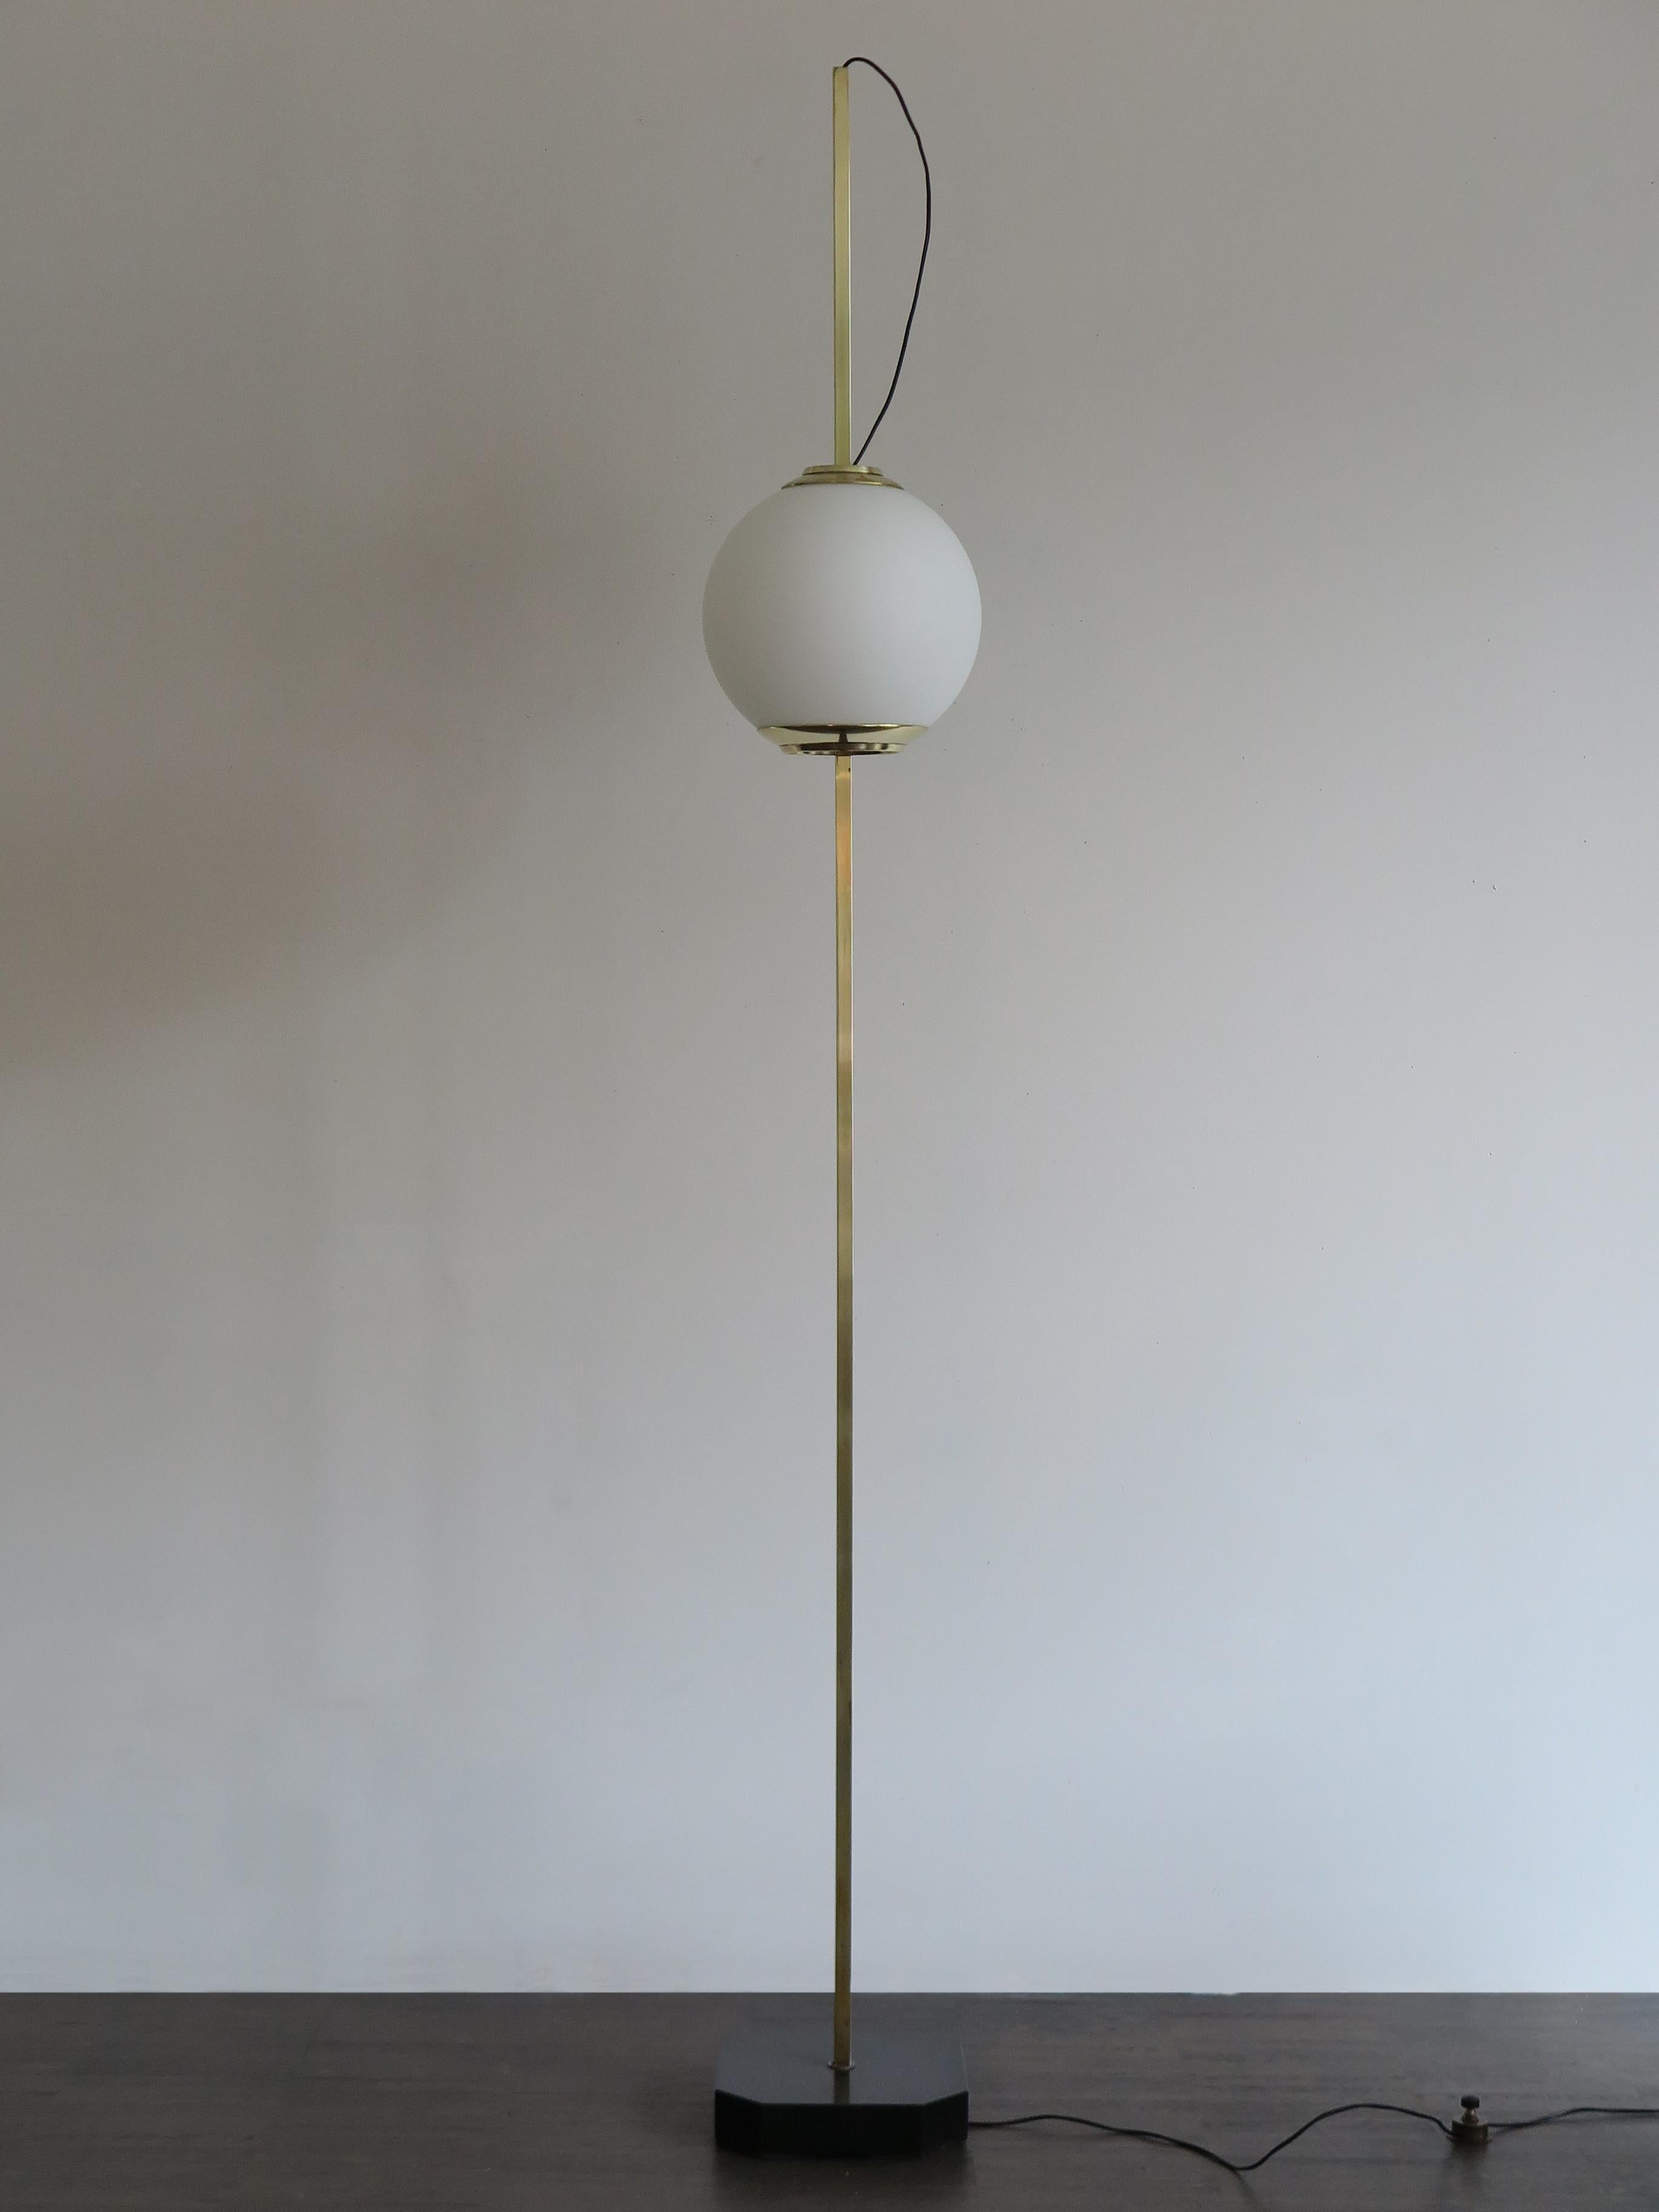 Italian famous and very rare Mid-Century Modern design floor lamp model “Lte 10 Pallone” designed by Luigi Caccia Dominioni and produced by Azucena with opal glass diffuser, polished brass structure and marble base, 1950s.

Please note that the